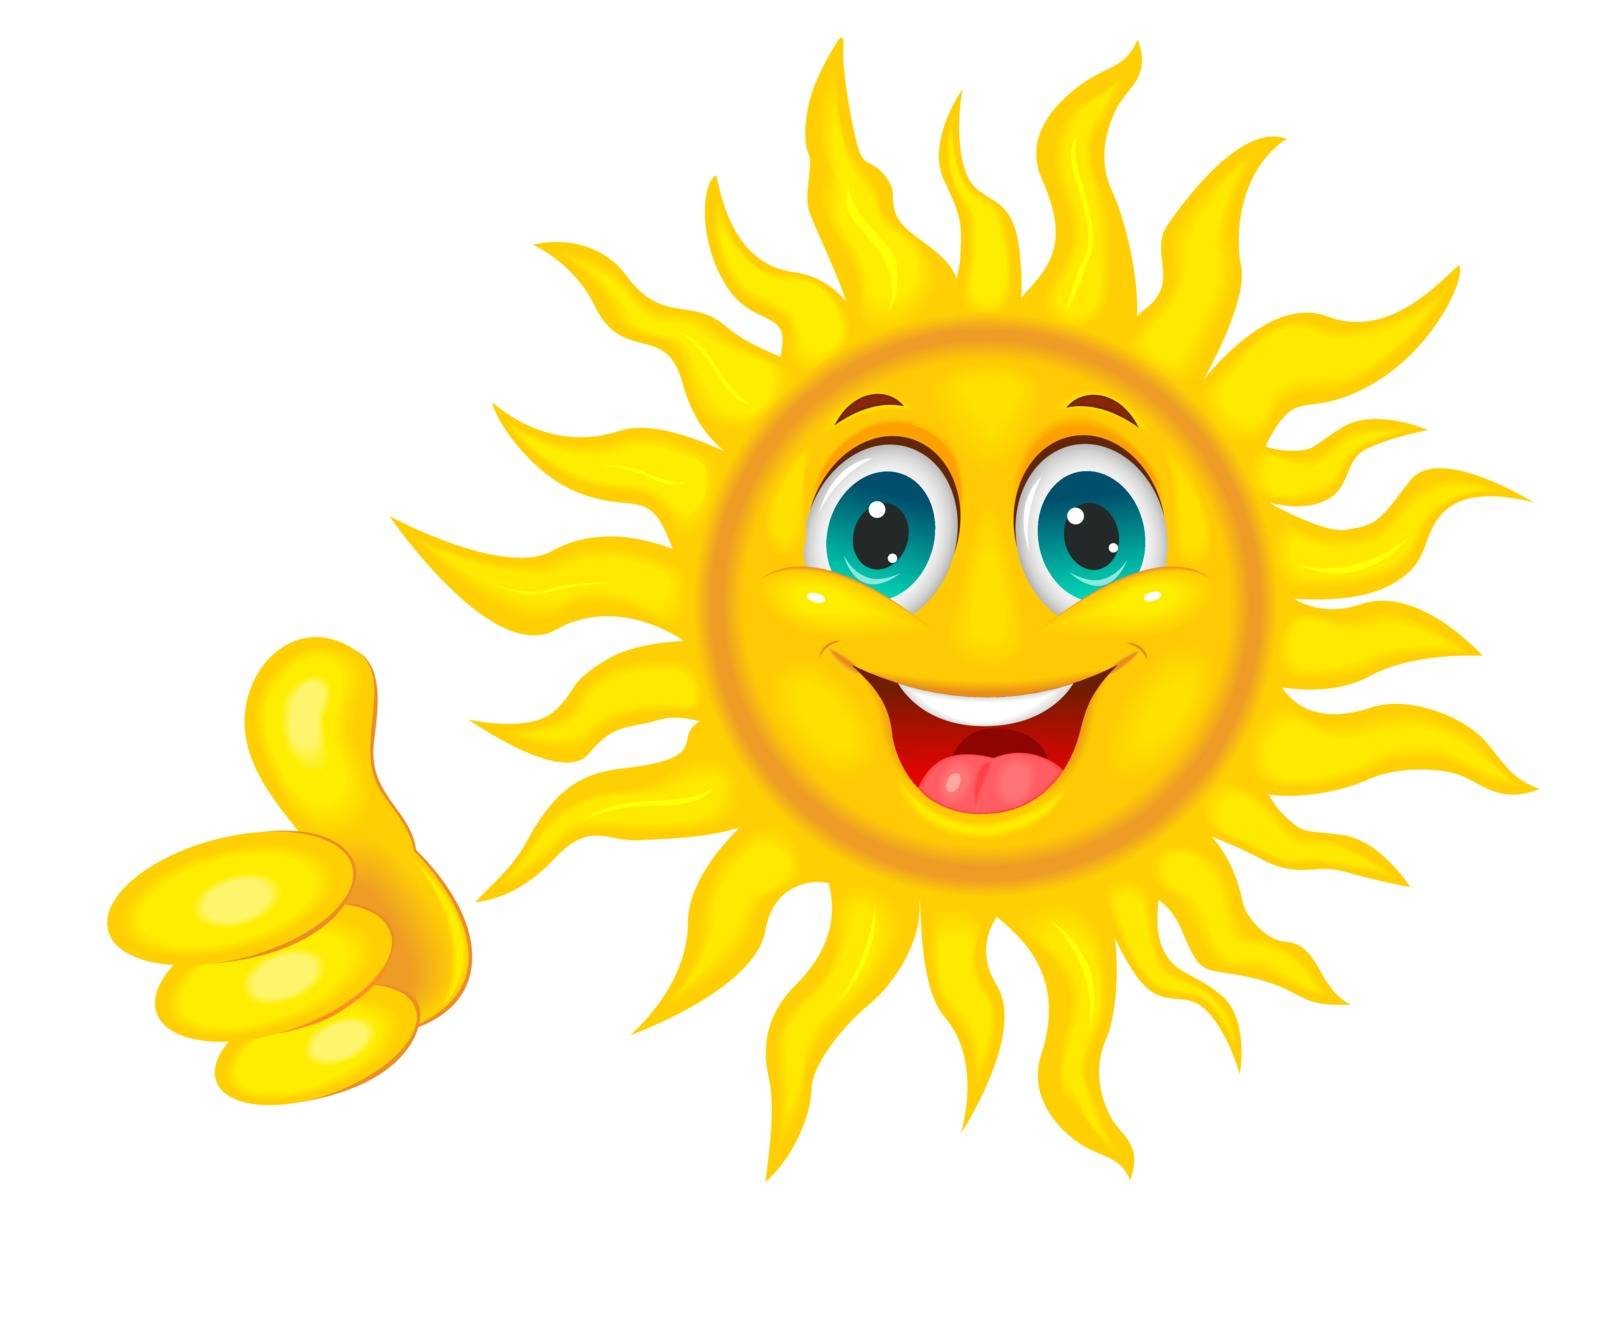 A cheerful cartoon sun on a white background. Smiling sun and hand with a finger raised up.